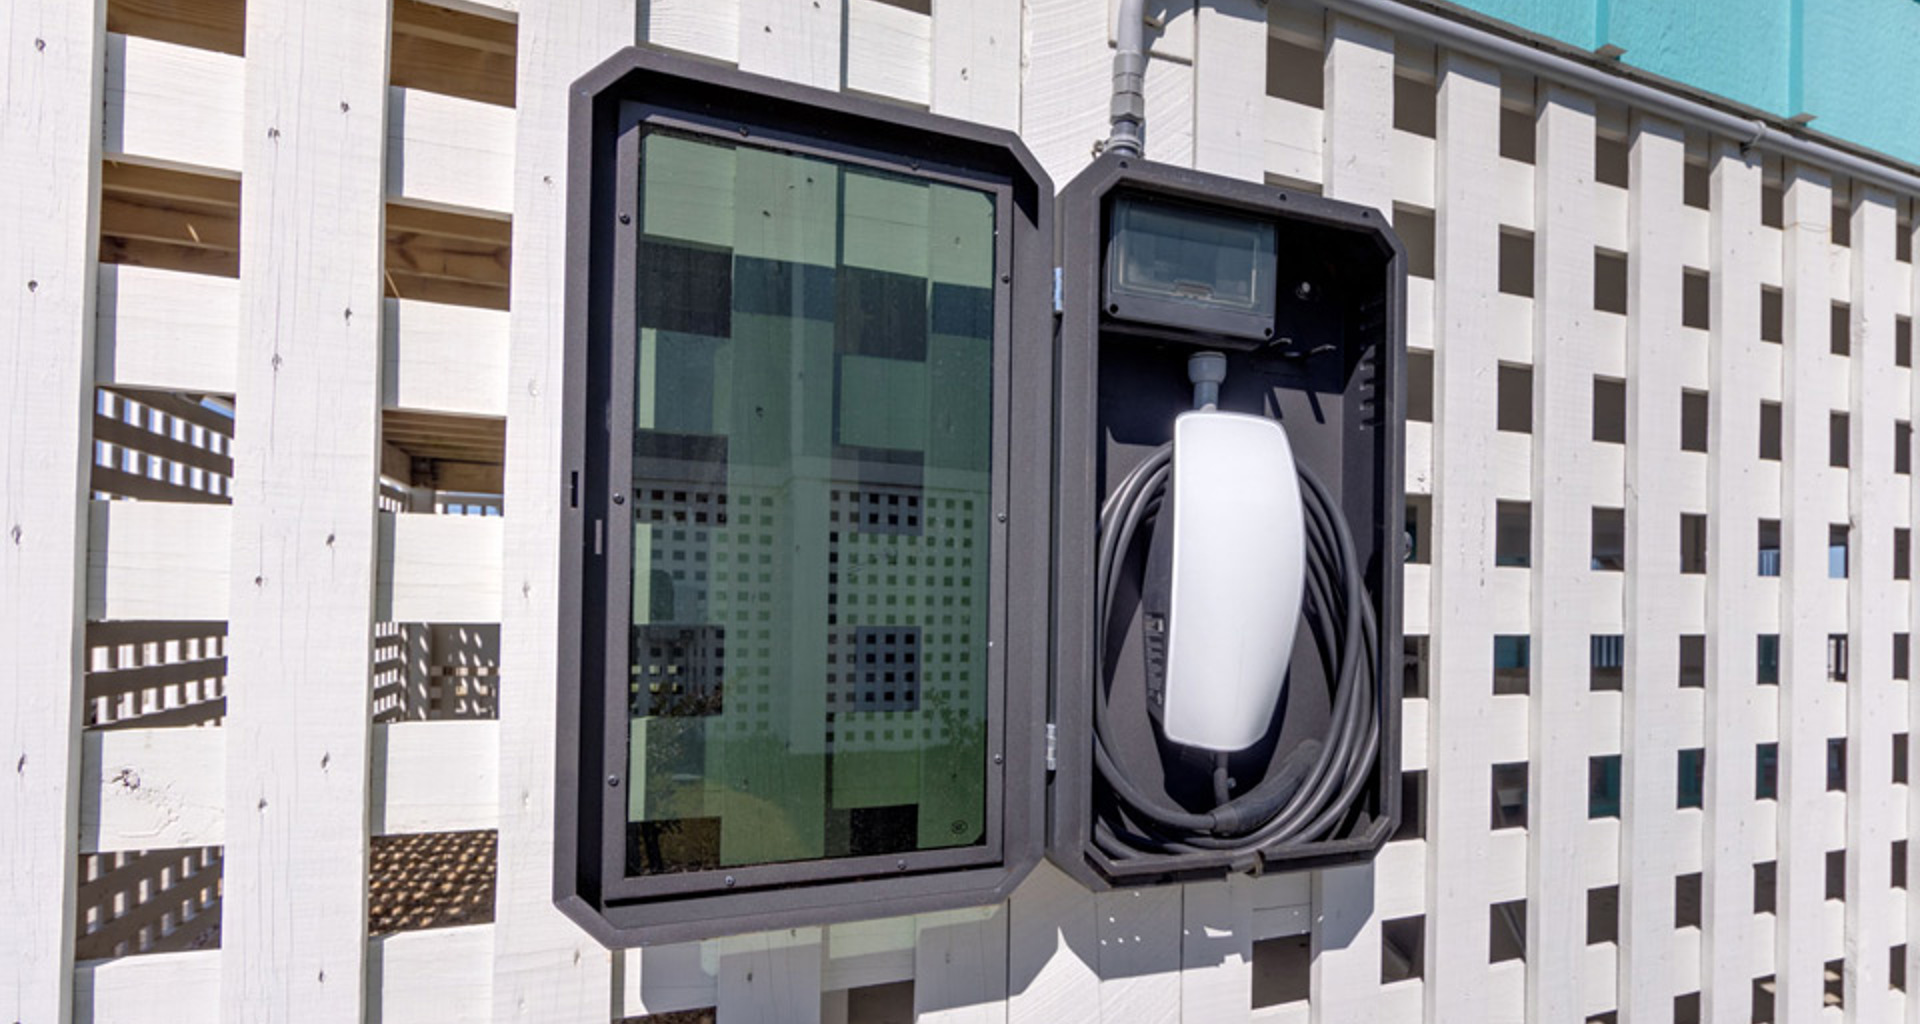 A residential EV charging station on a lattice wall that is part of a Hatteras Island beach house